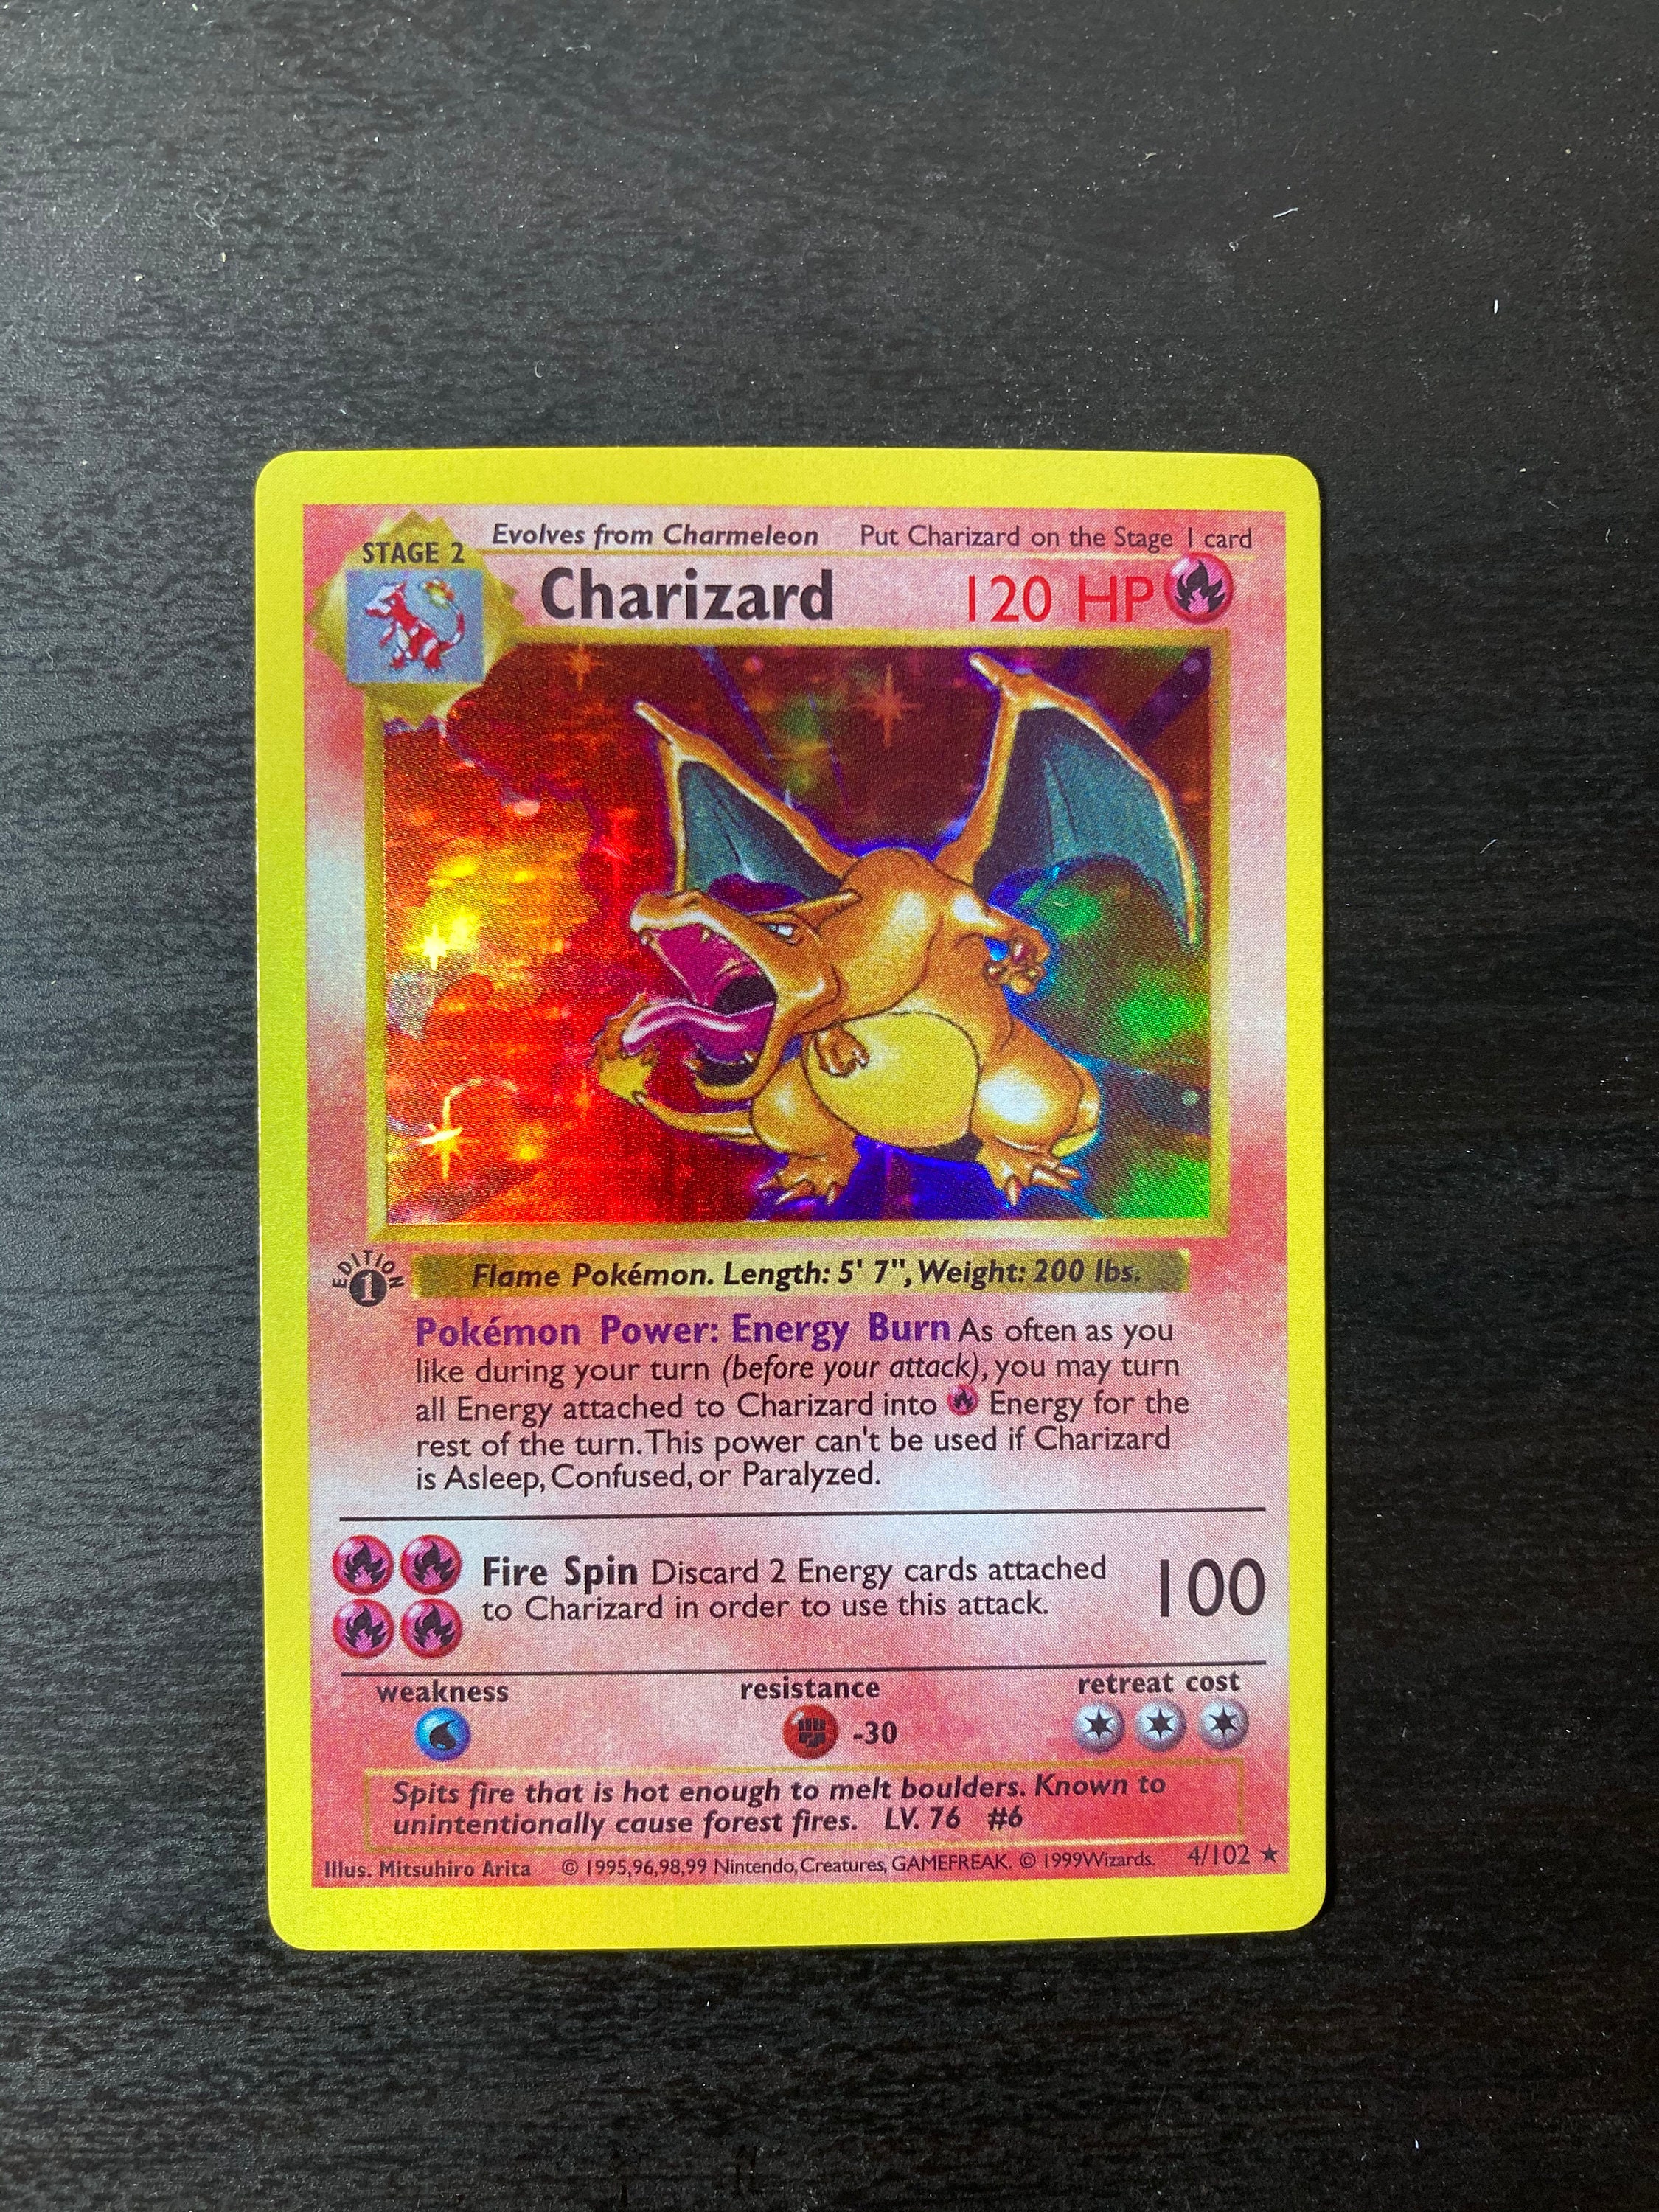 1St Edition Charizard for sale | Only 3 left at -75%